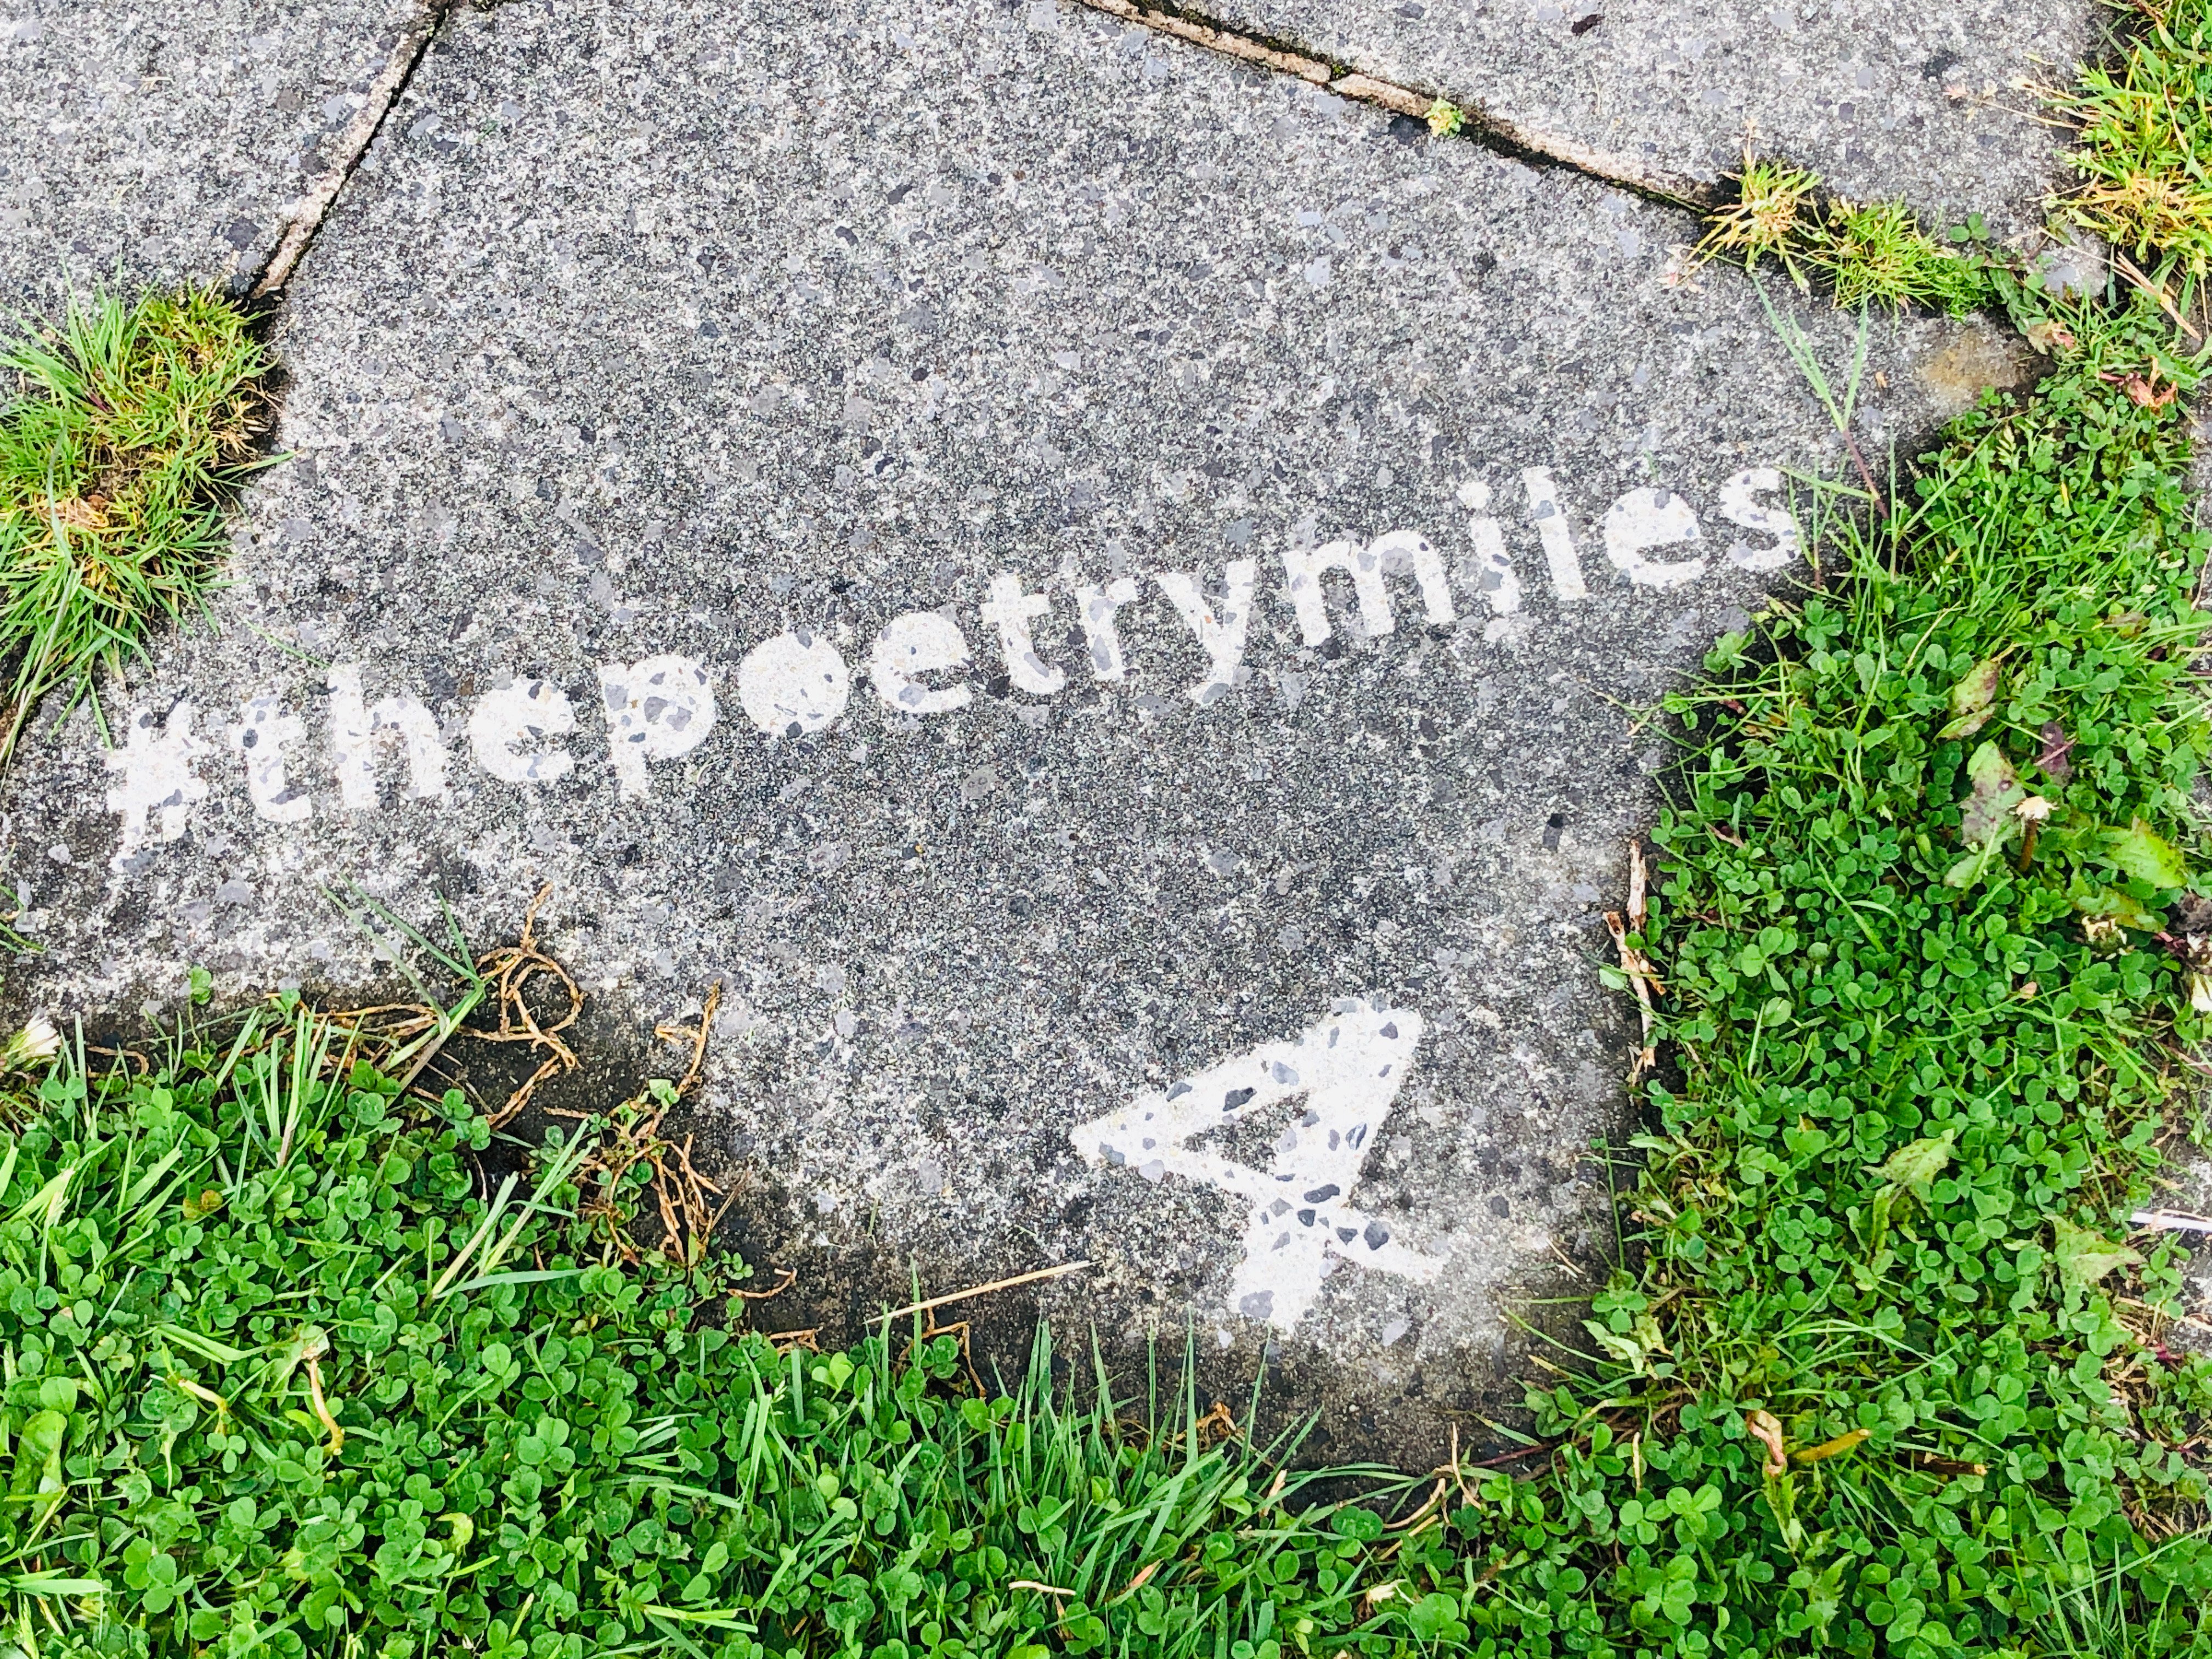 The Poetry Miles